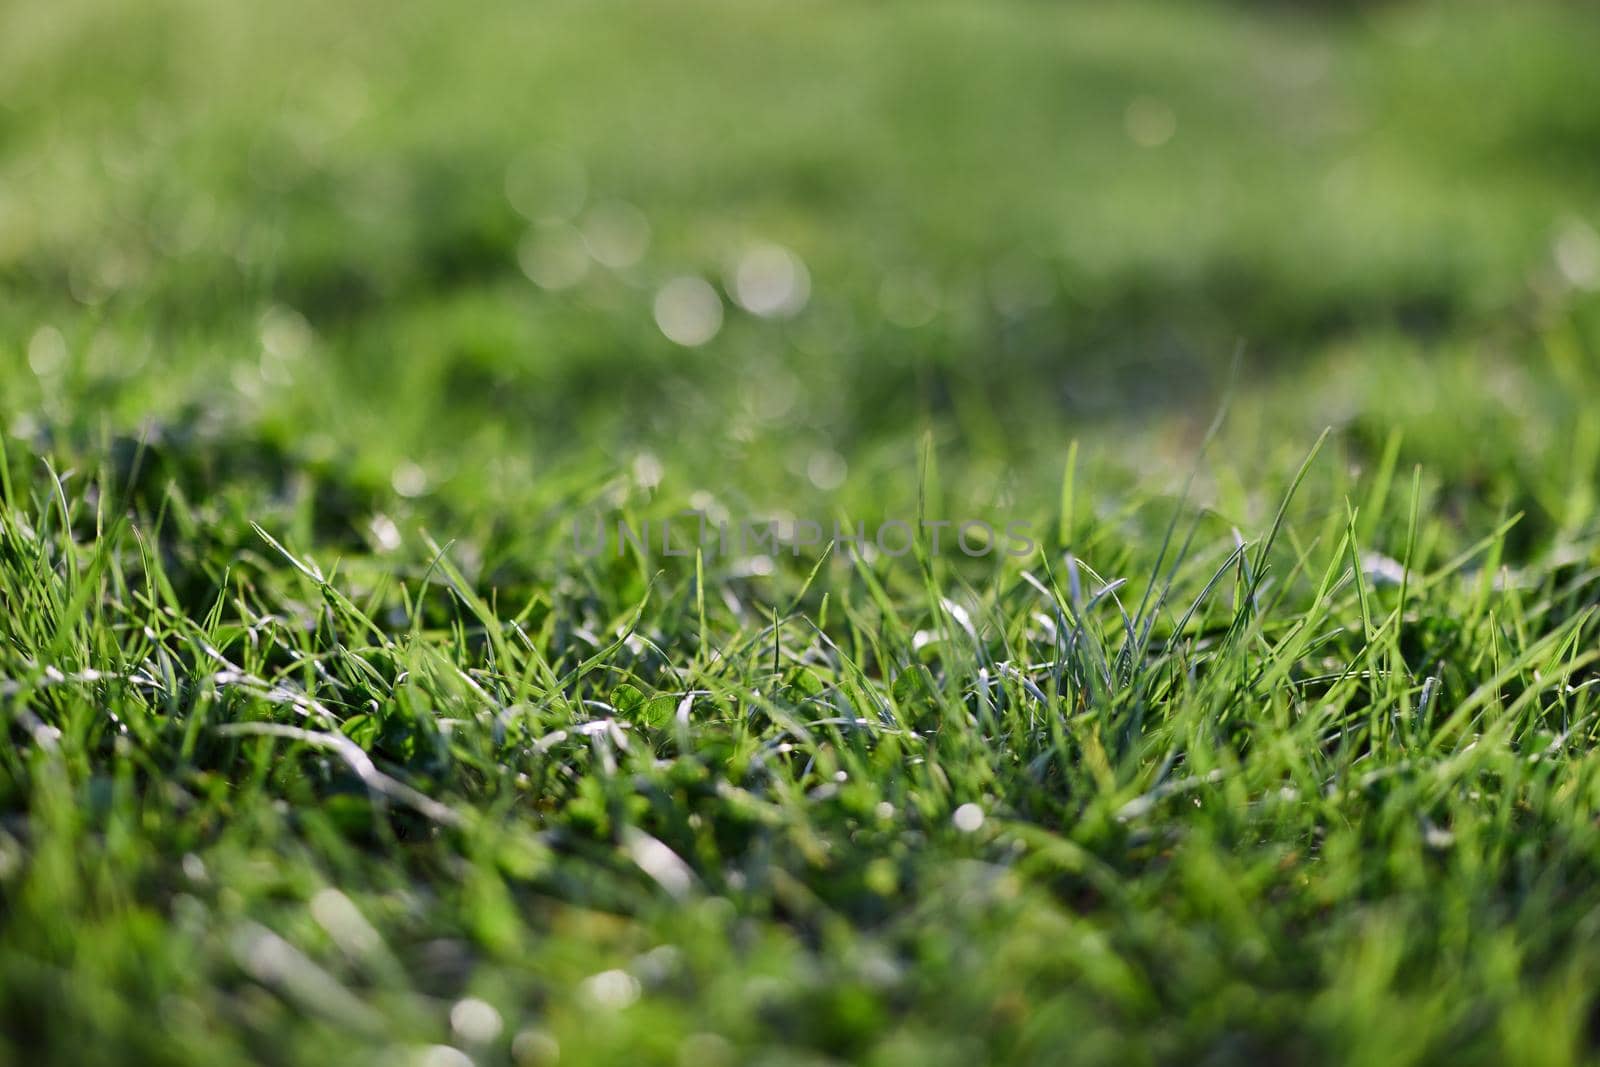 View of young green grass in the park, taken close-up with a beautiful blurring of the background by SHOTPRIME